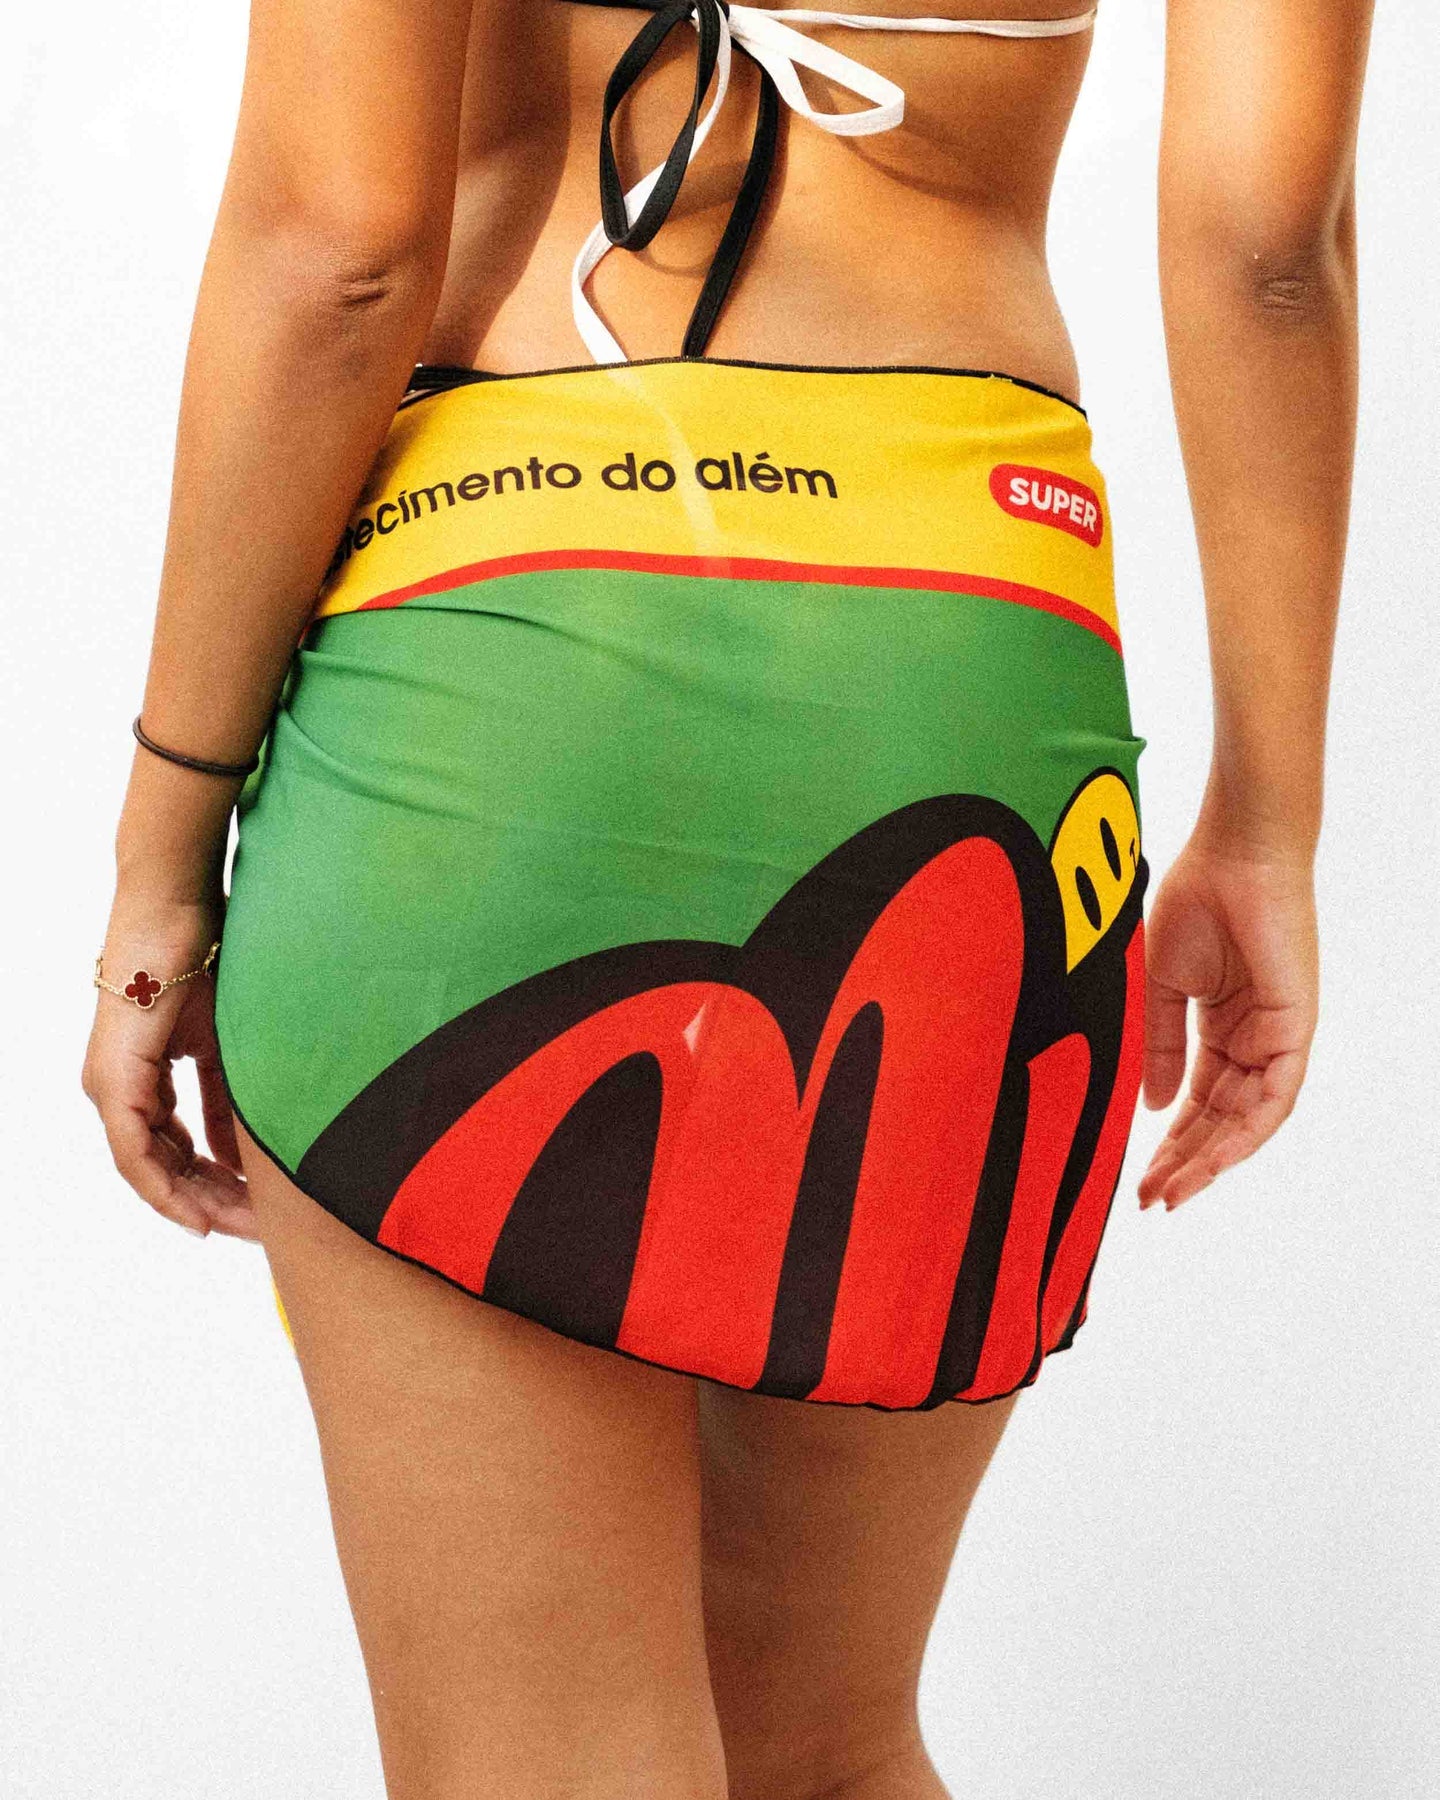 Close up rear view shot of a model showcasing a beautiful light weight black yellow and green Rio inspired sarong.